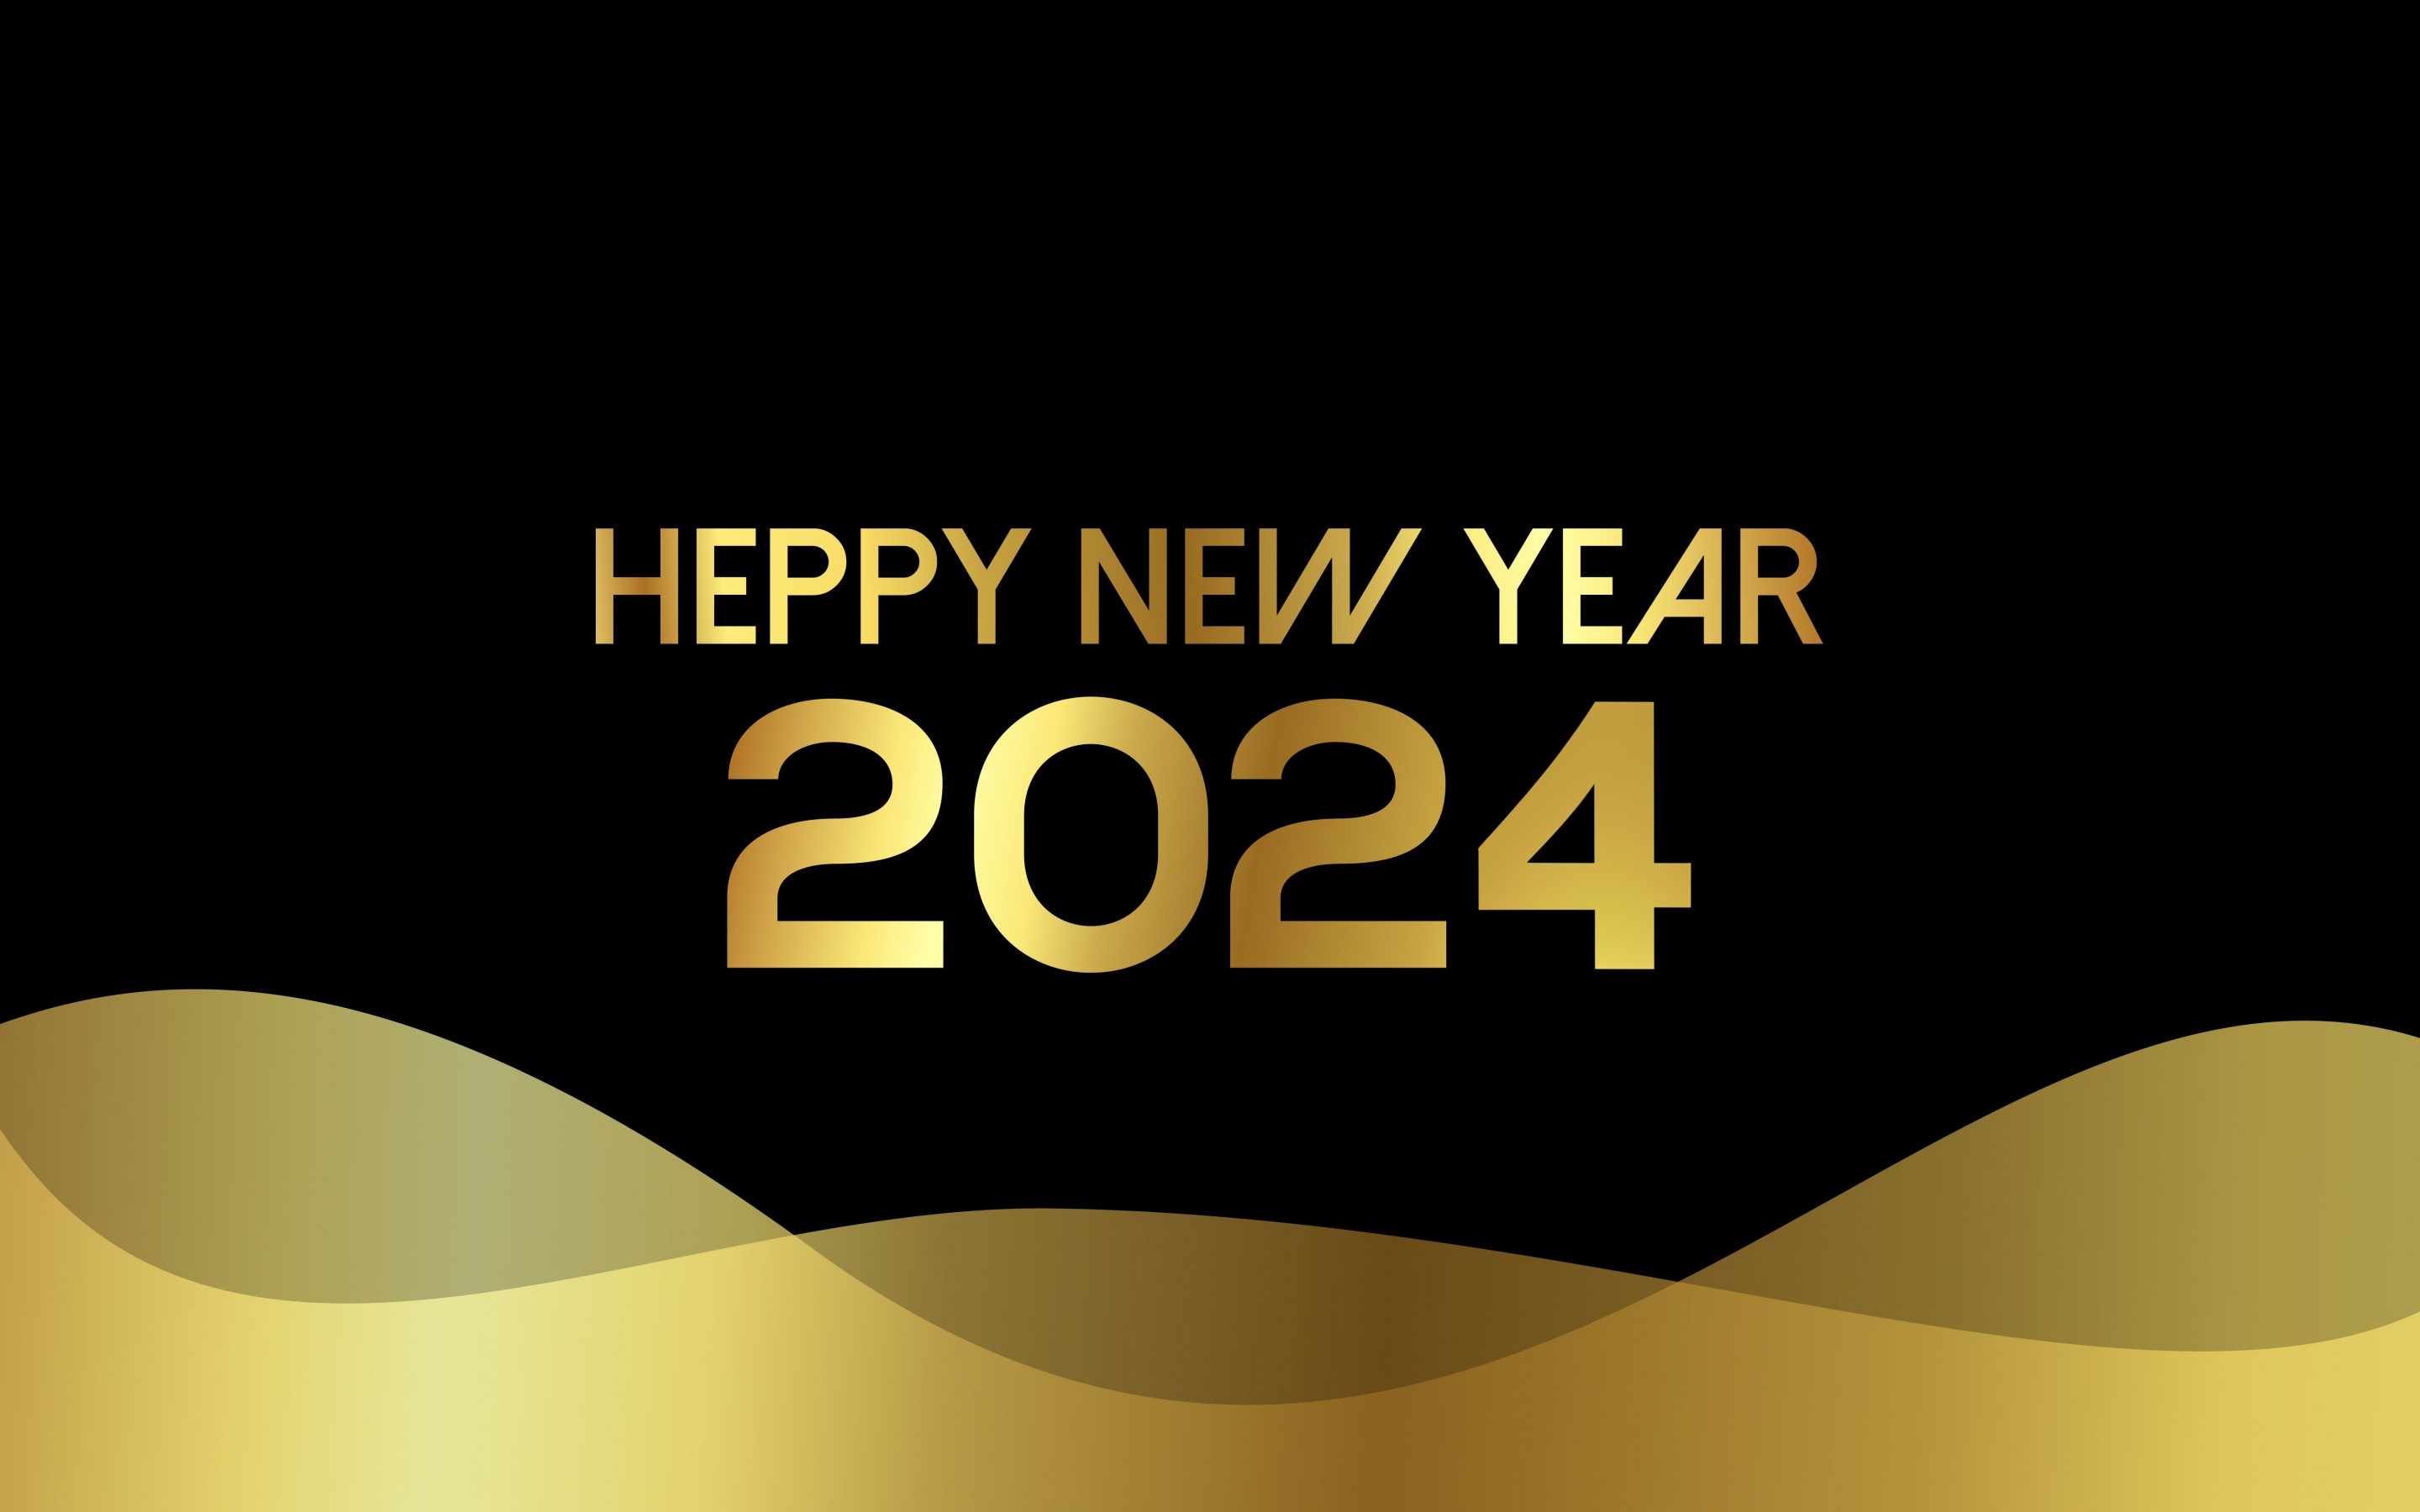 Happy New Year 2024 Wallpaper 4K, Wishes, Golden letters, AMOLED